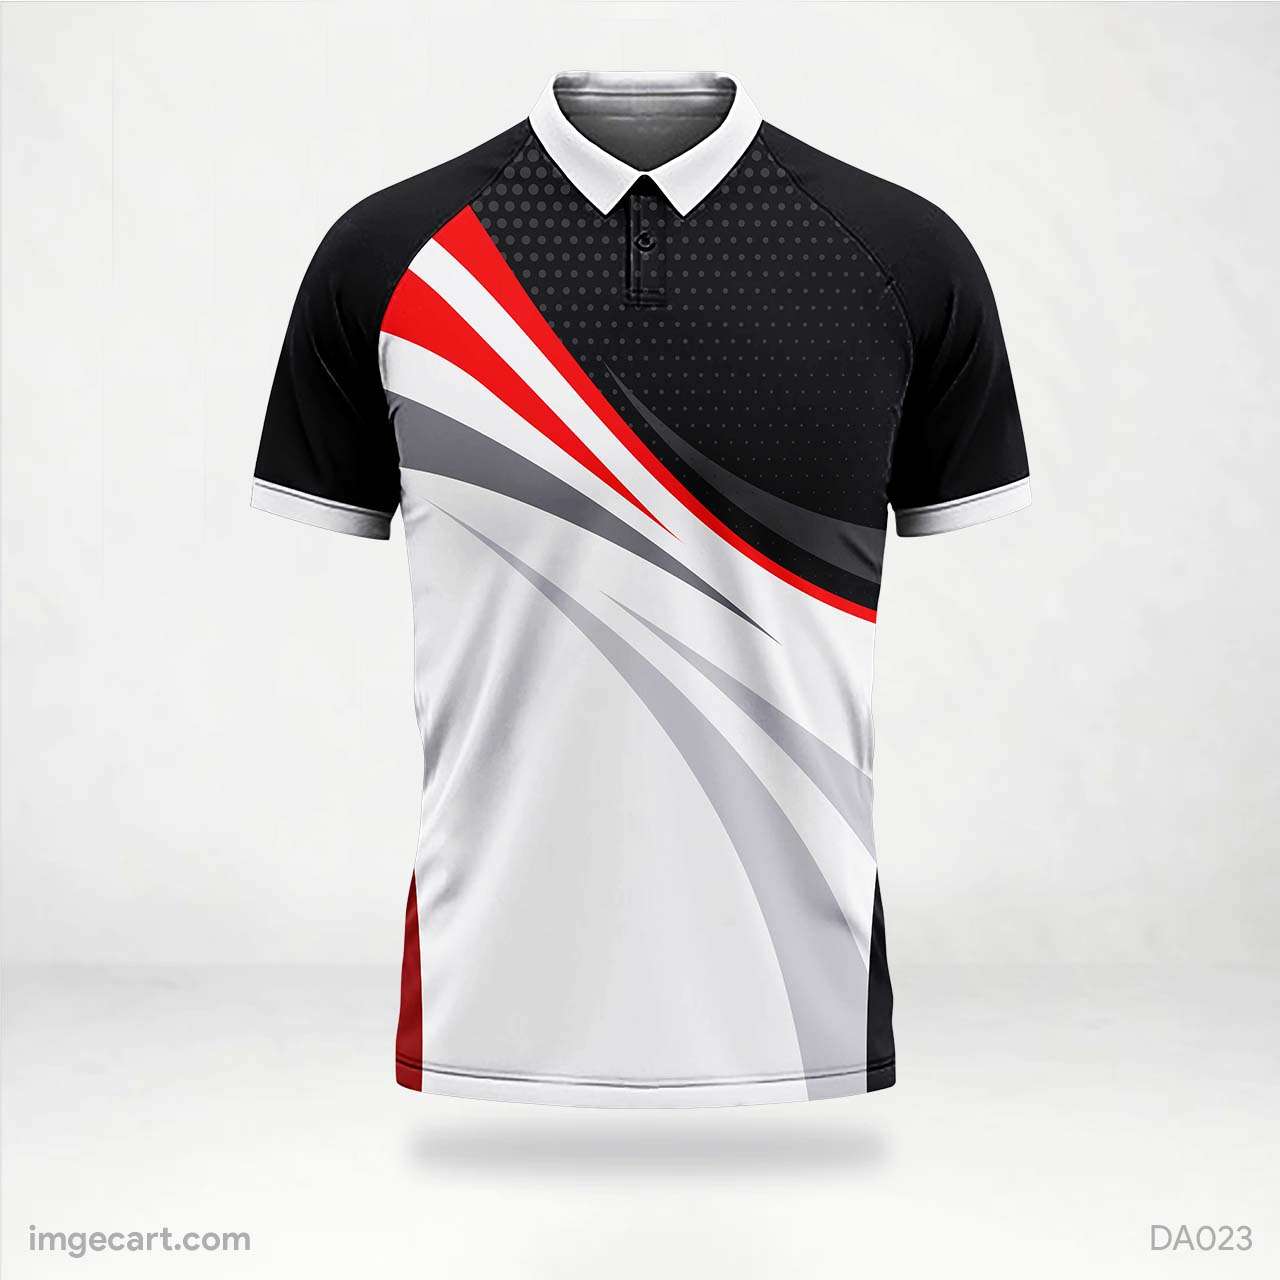 Cricket Jersey Design Red and Black